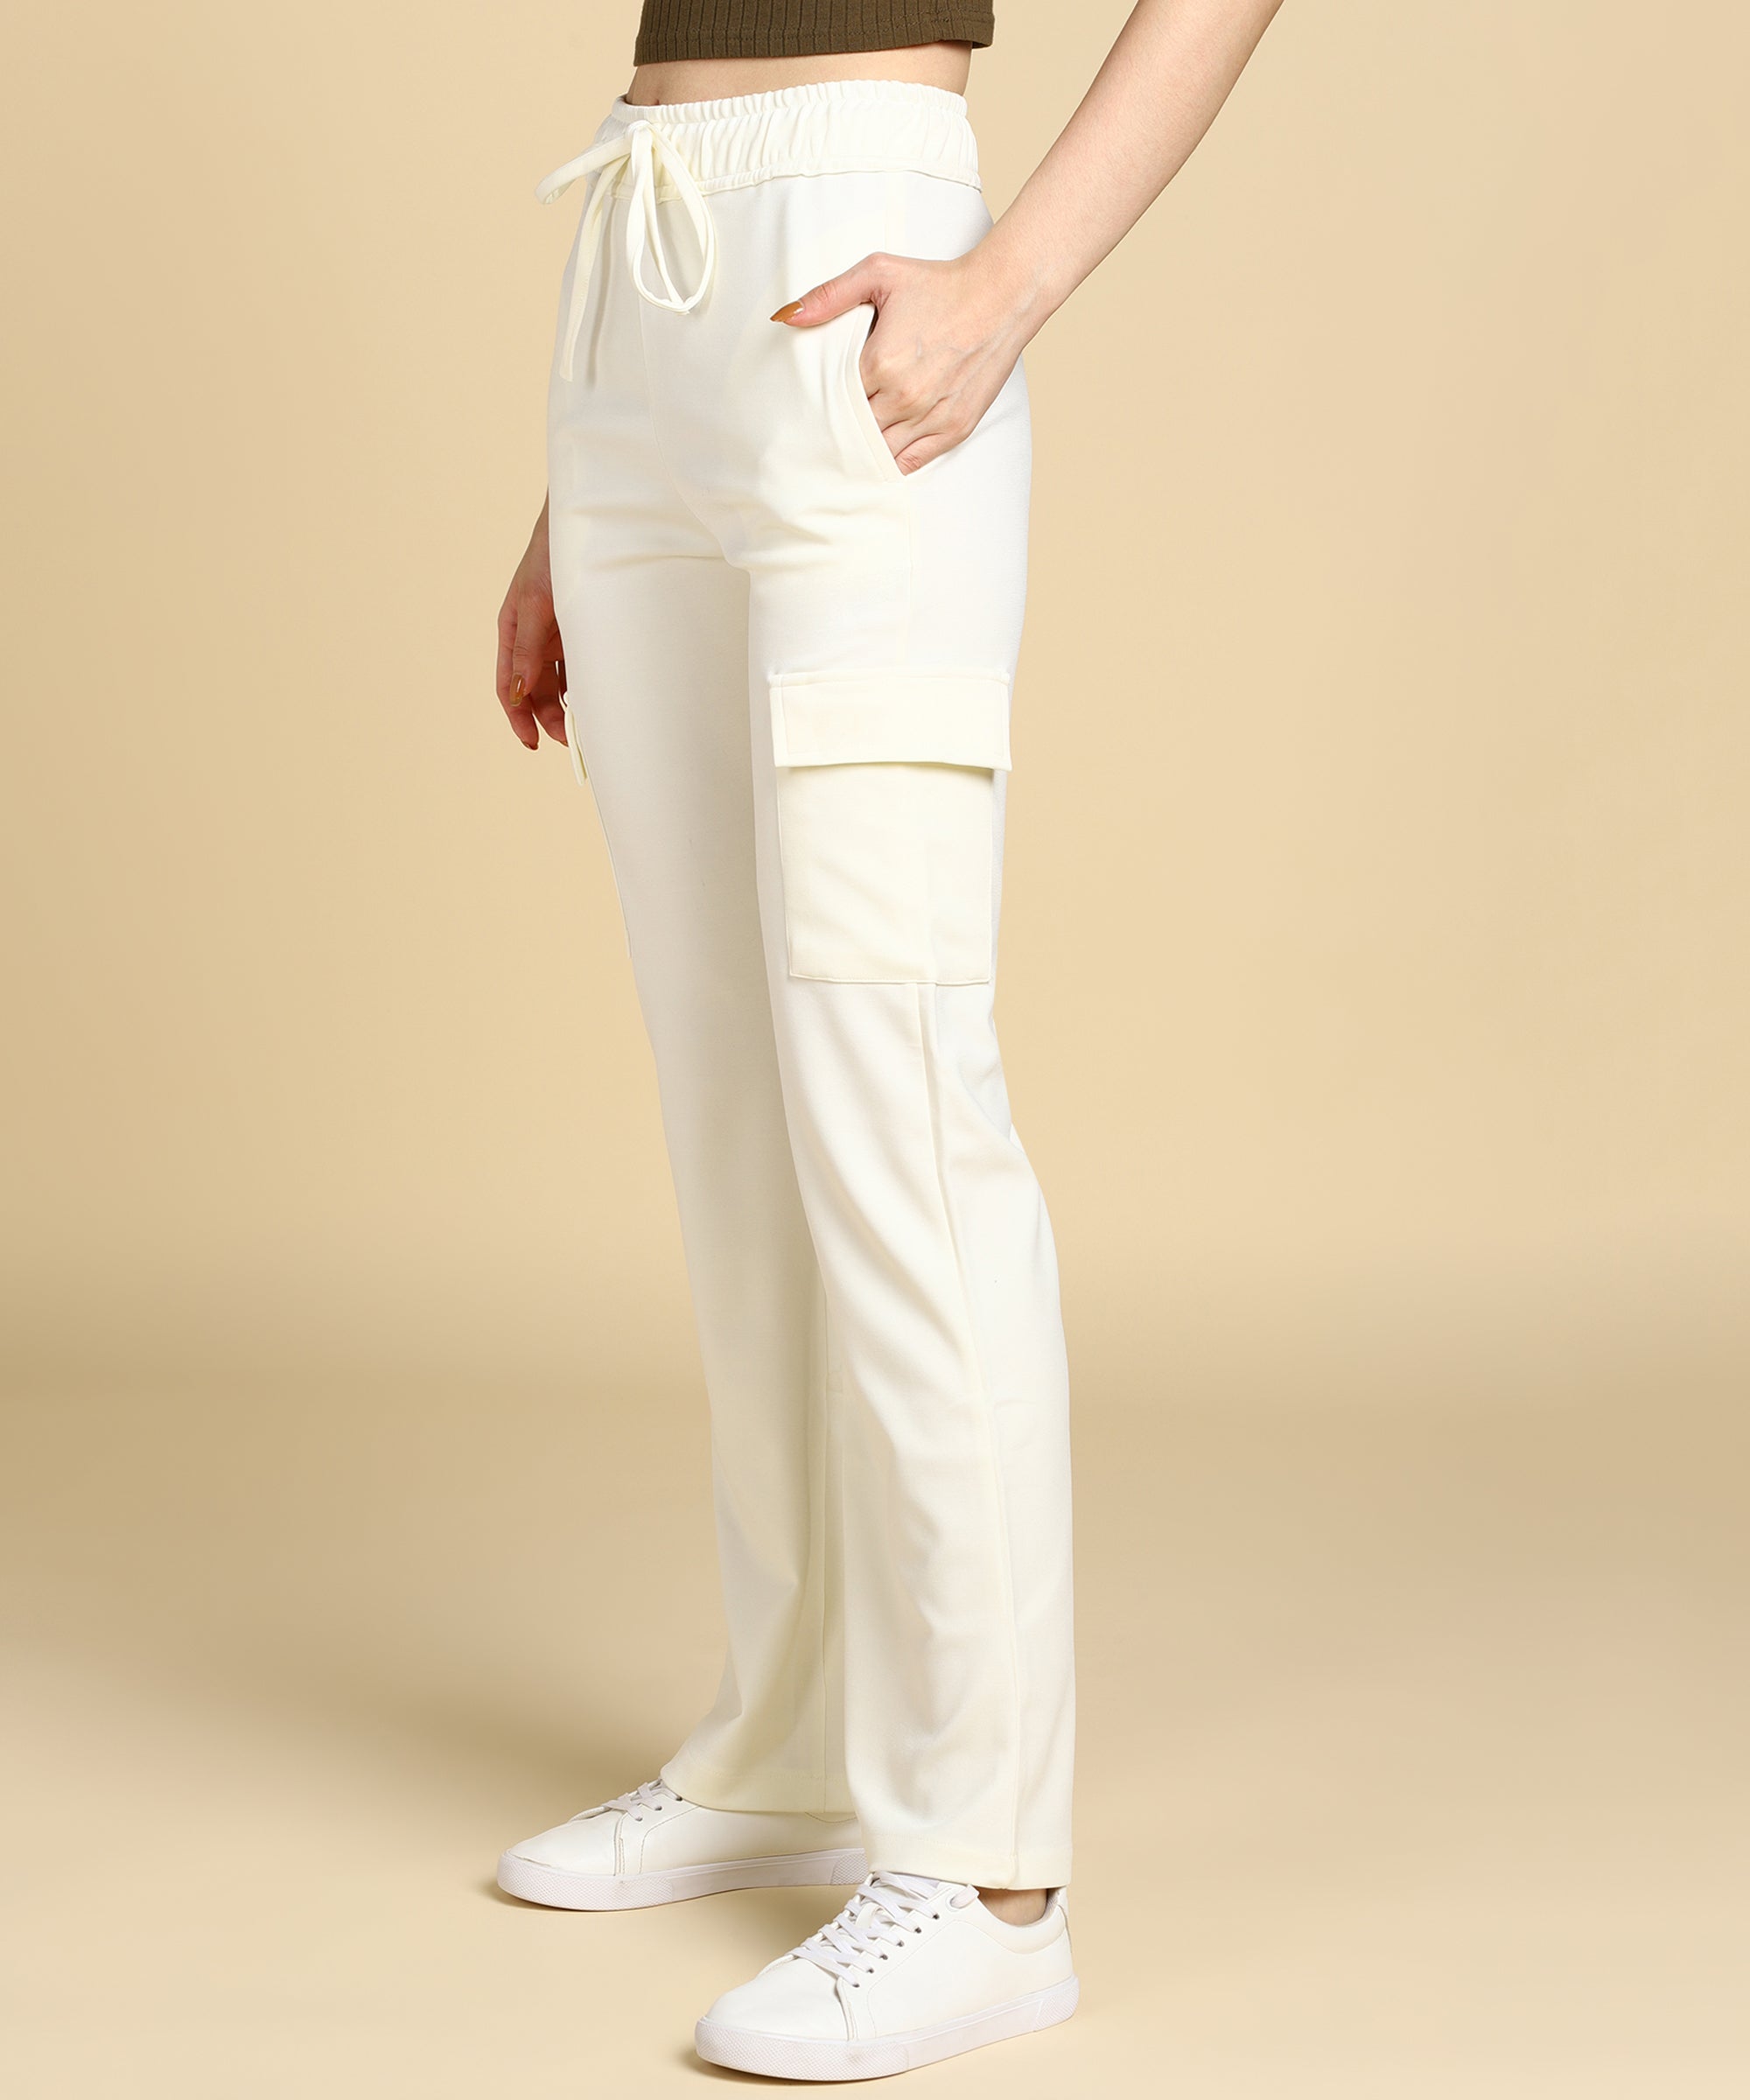 Buy Casual Men's Skinny fit Clean Front Formal Trouser Dress Pants (34, Off  White) at Amazon.in